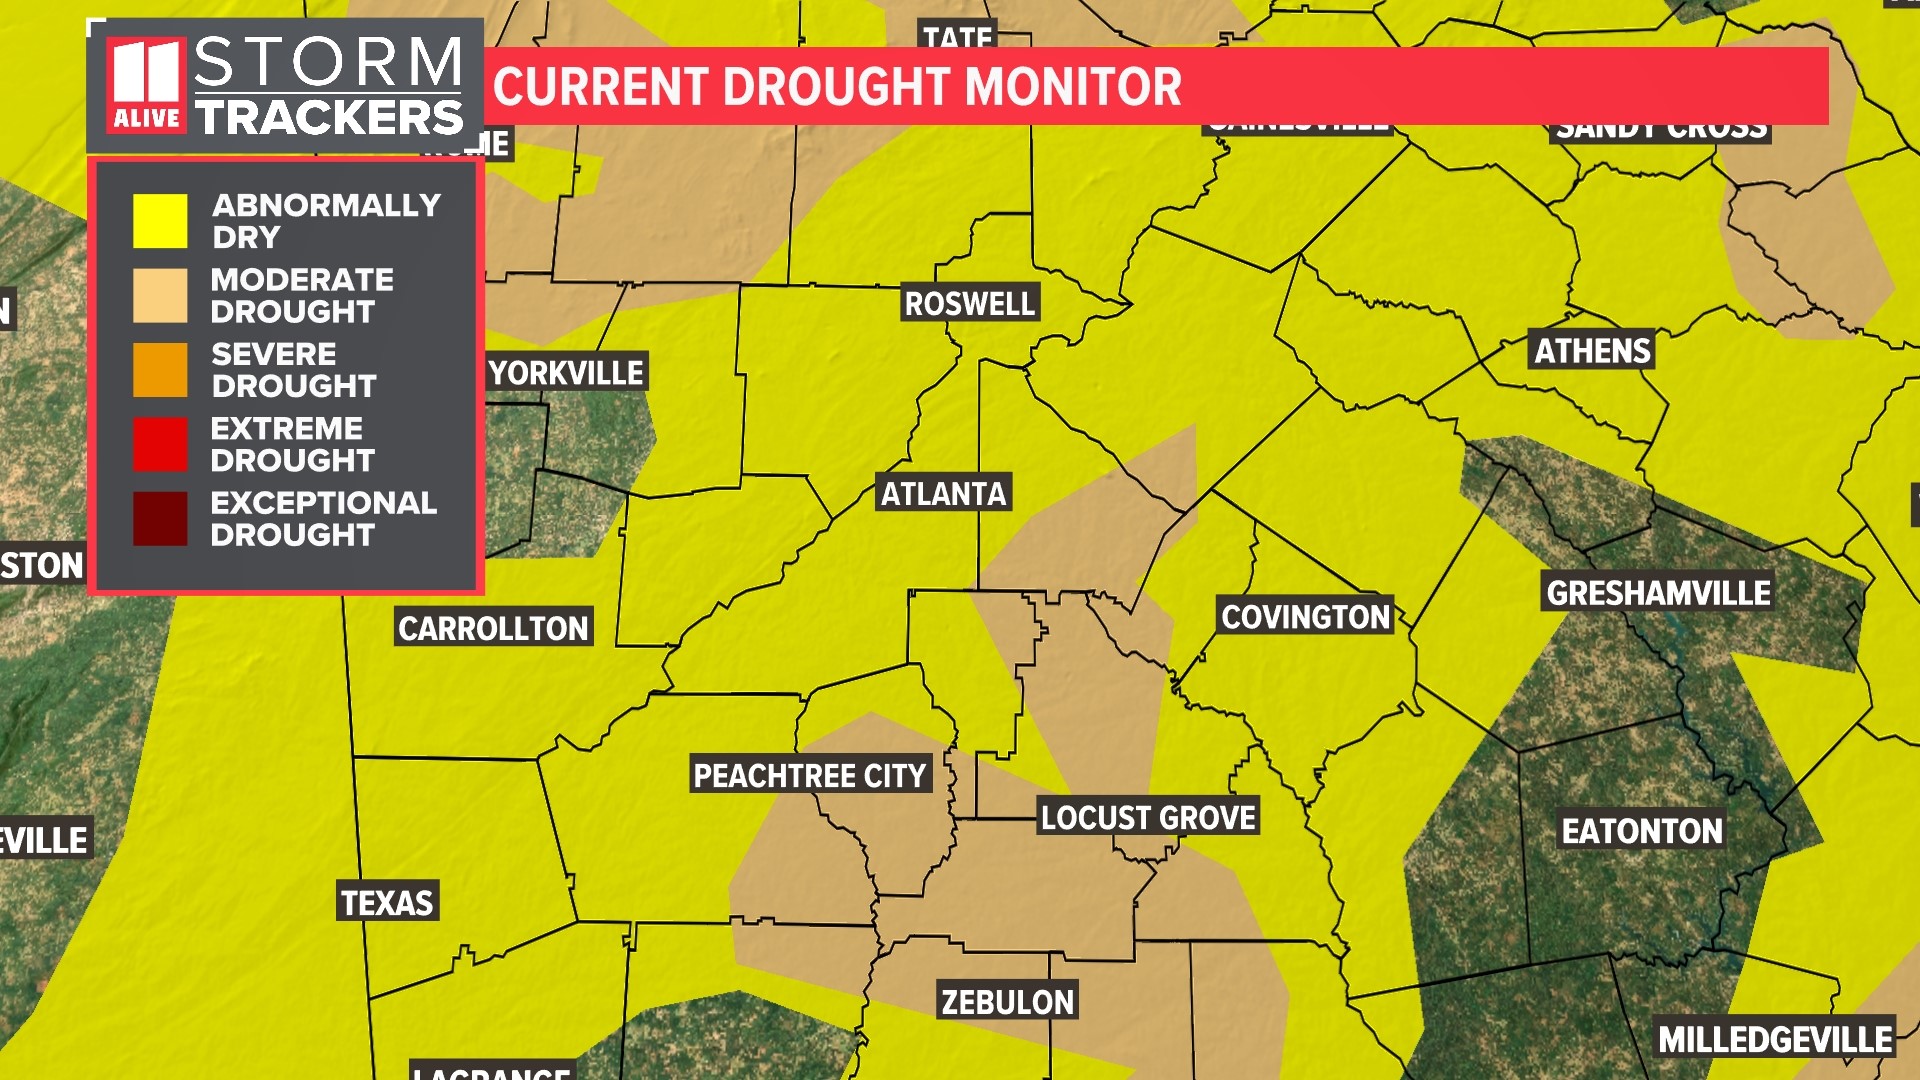 Around the Atlanta metro, Fulton, most of Gwinnet, and Clayton counties are no longer in a drought